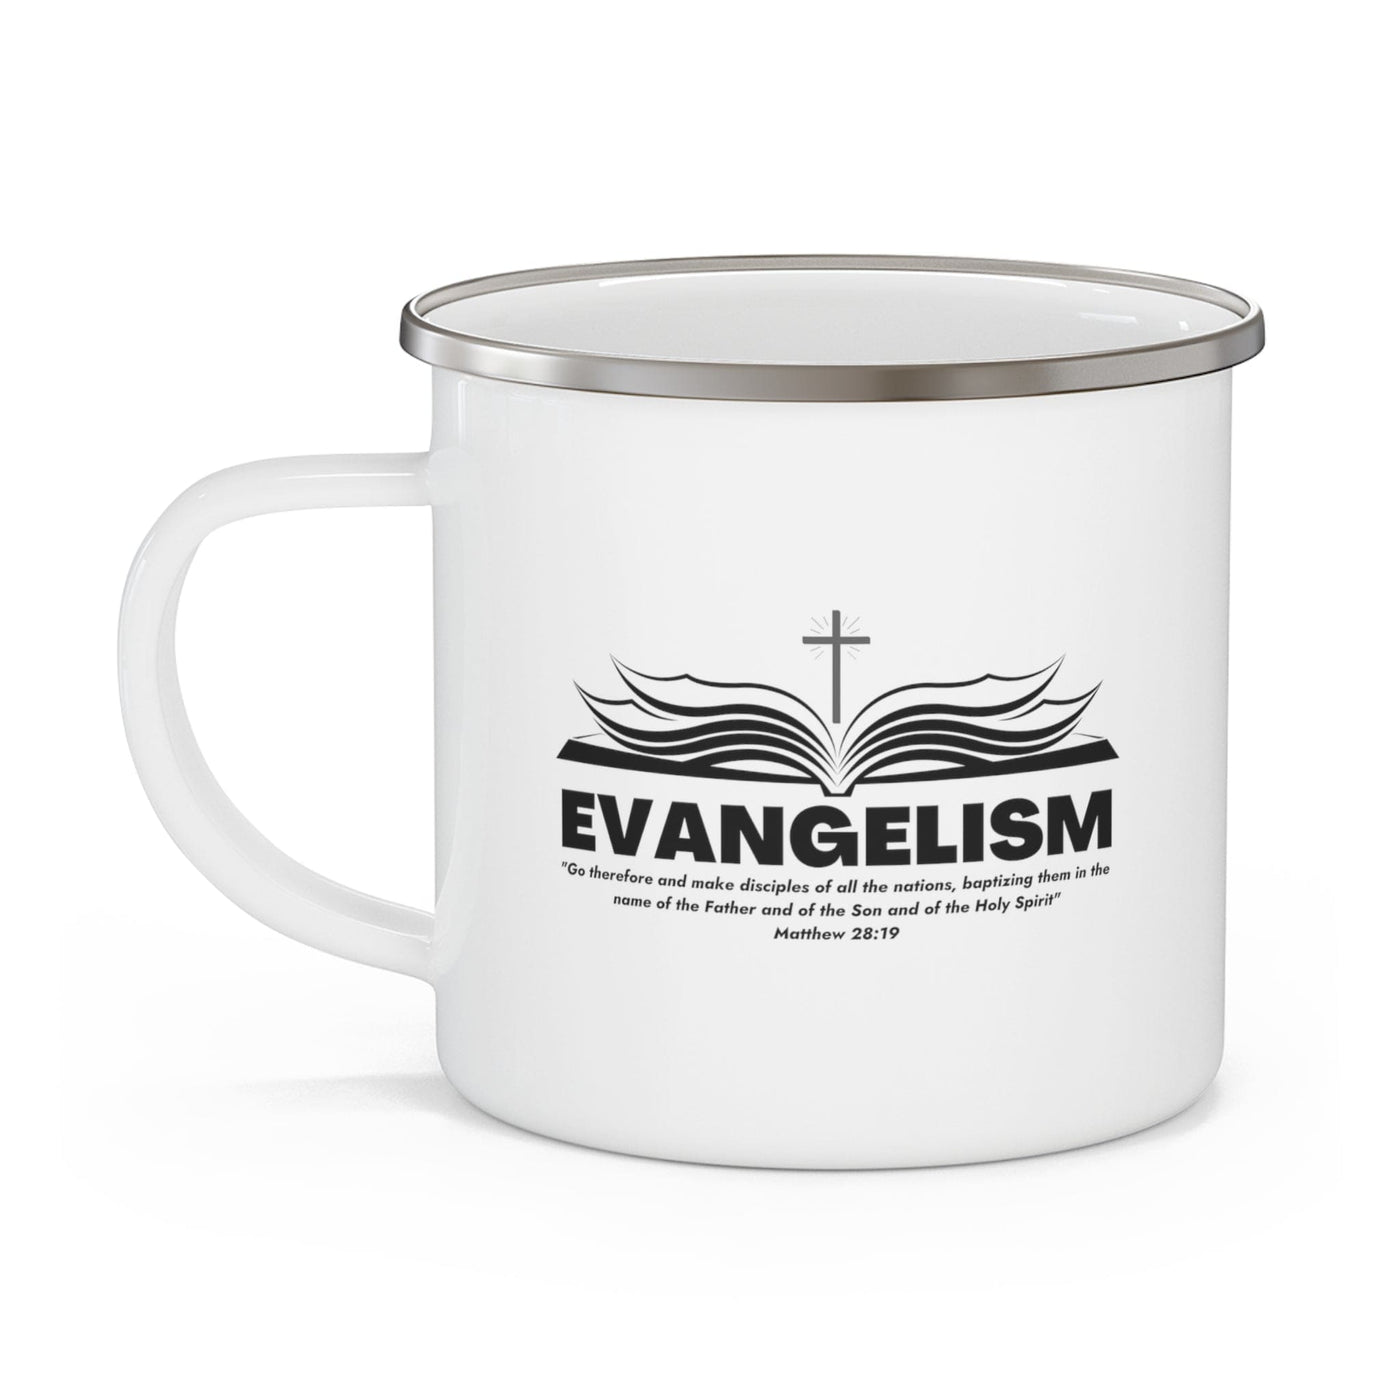 Enamel Camping Mug Evangelism - Go Therefore And Make Disciples Decorative